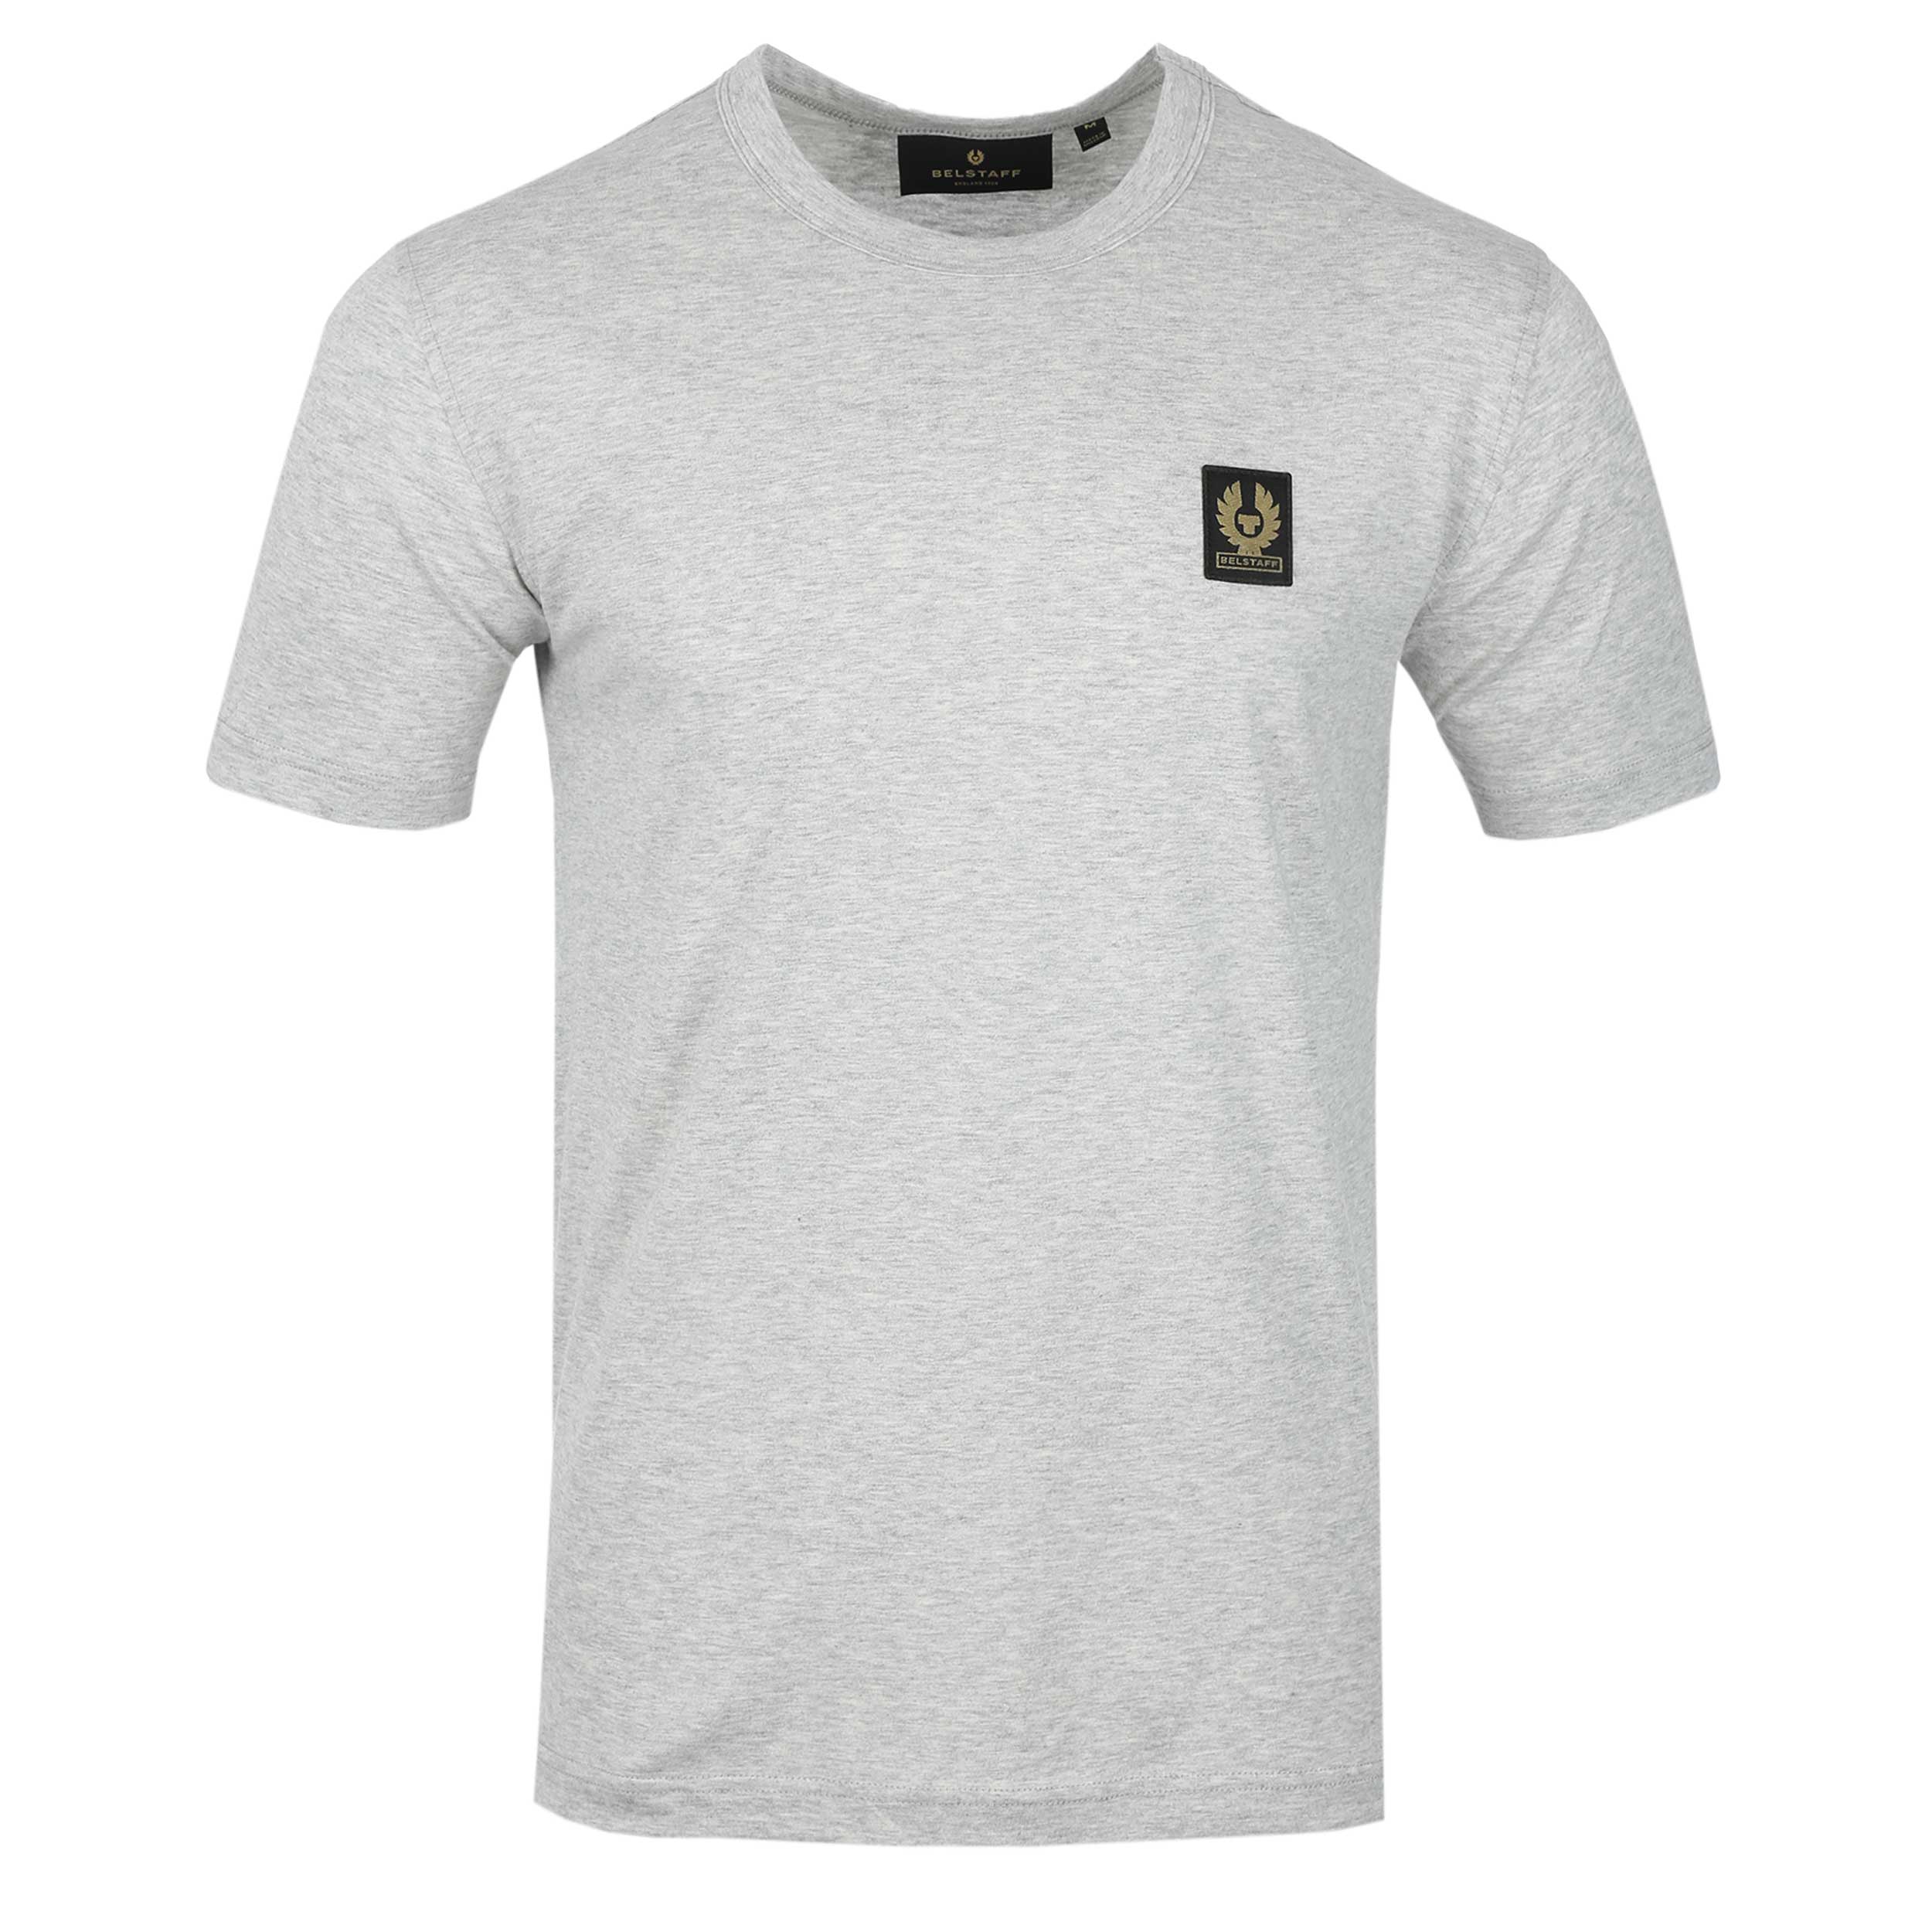 Belstaff Classic T-Shirt in Old Silver Heather